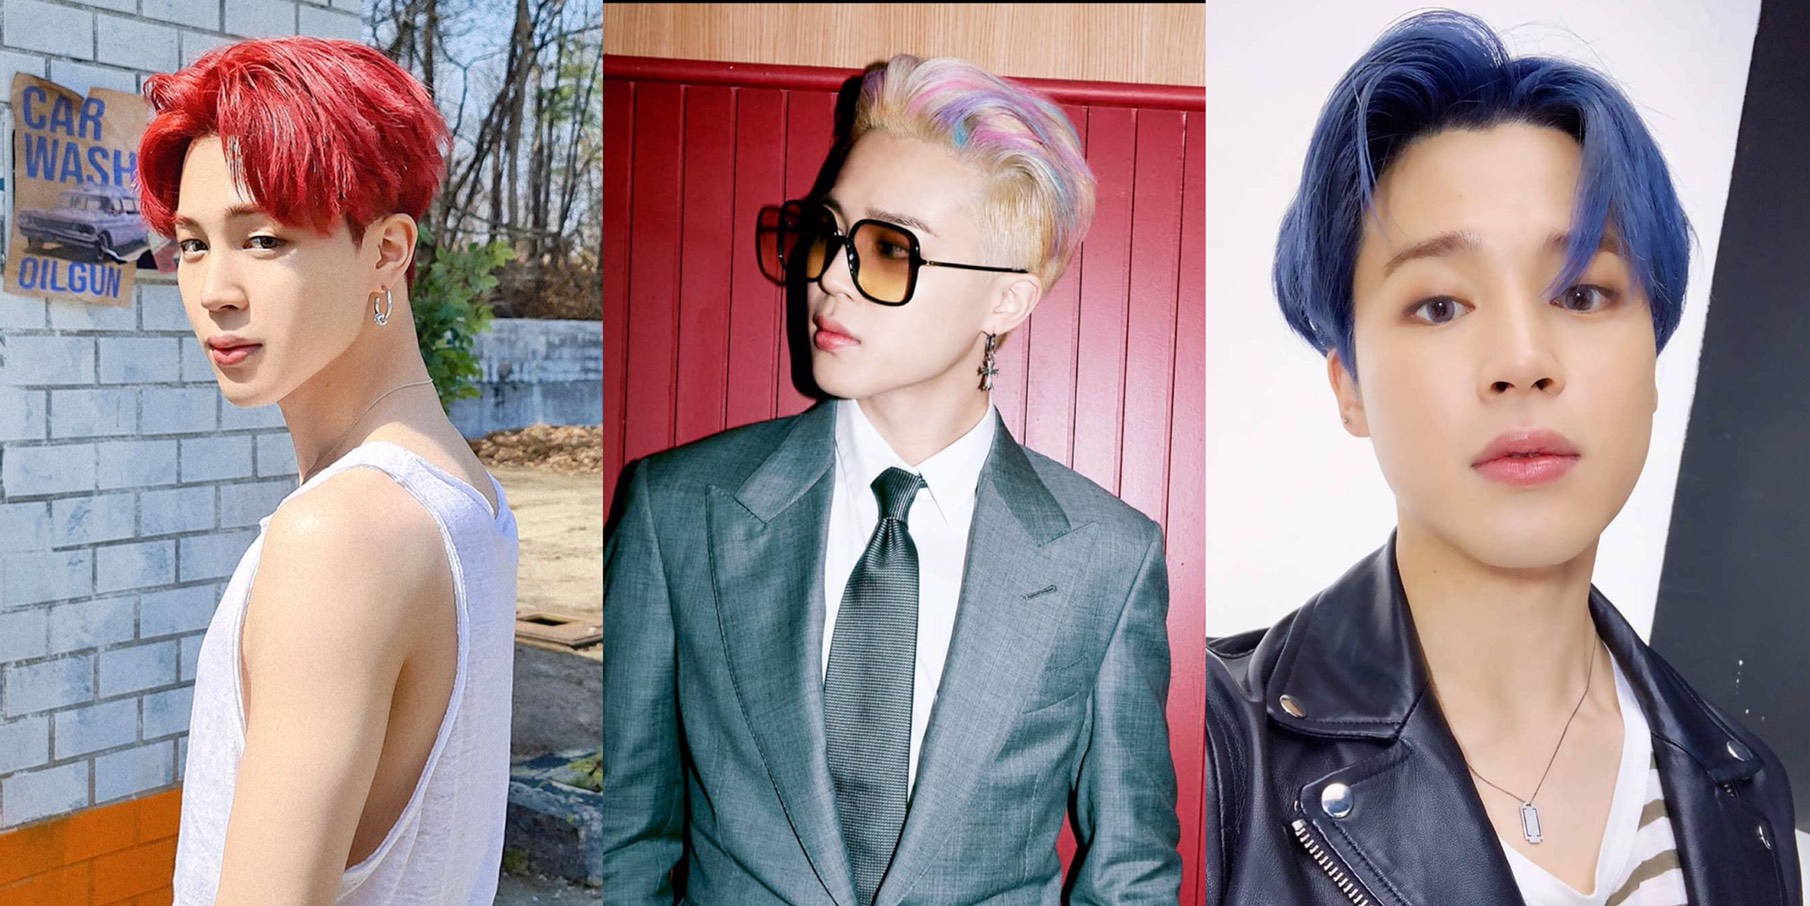 Frequently Changing Hair Colors, These 5 Hair Colors of Jimin BTS Are Very Unique!